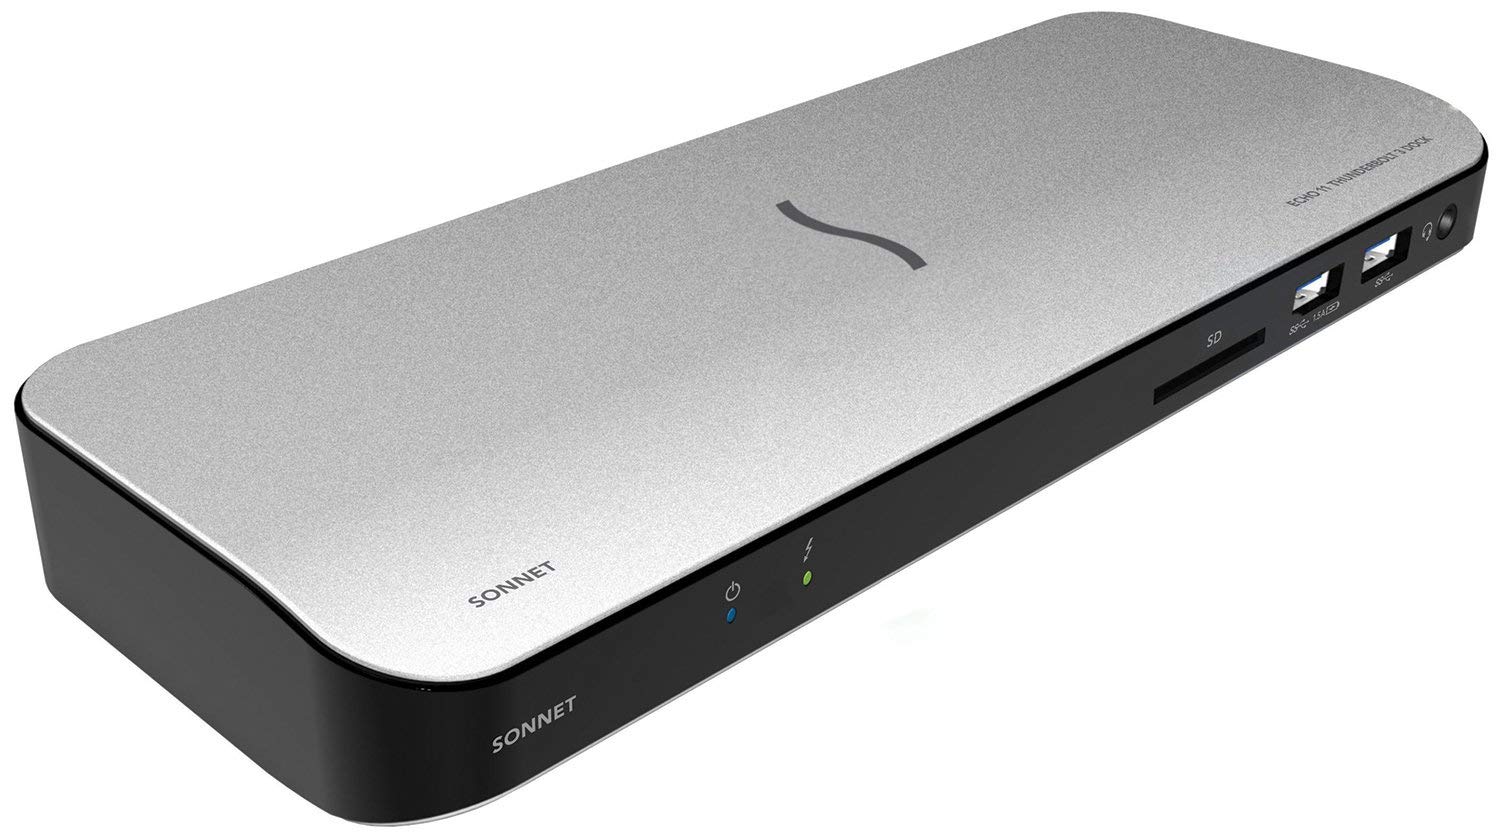 Sonnet Dock Brings All the Ports a MacBook Pro Owner May Want